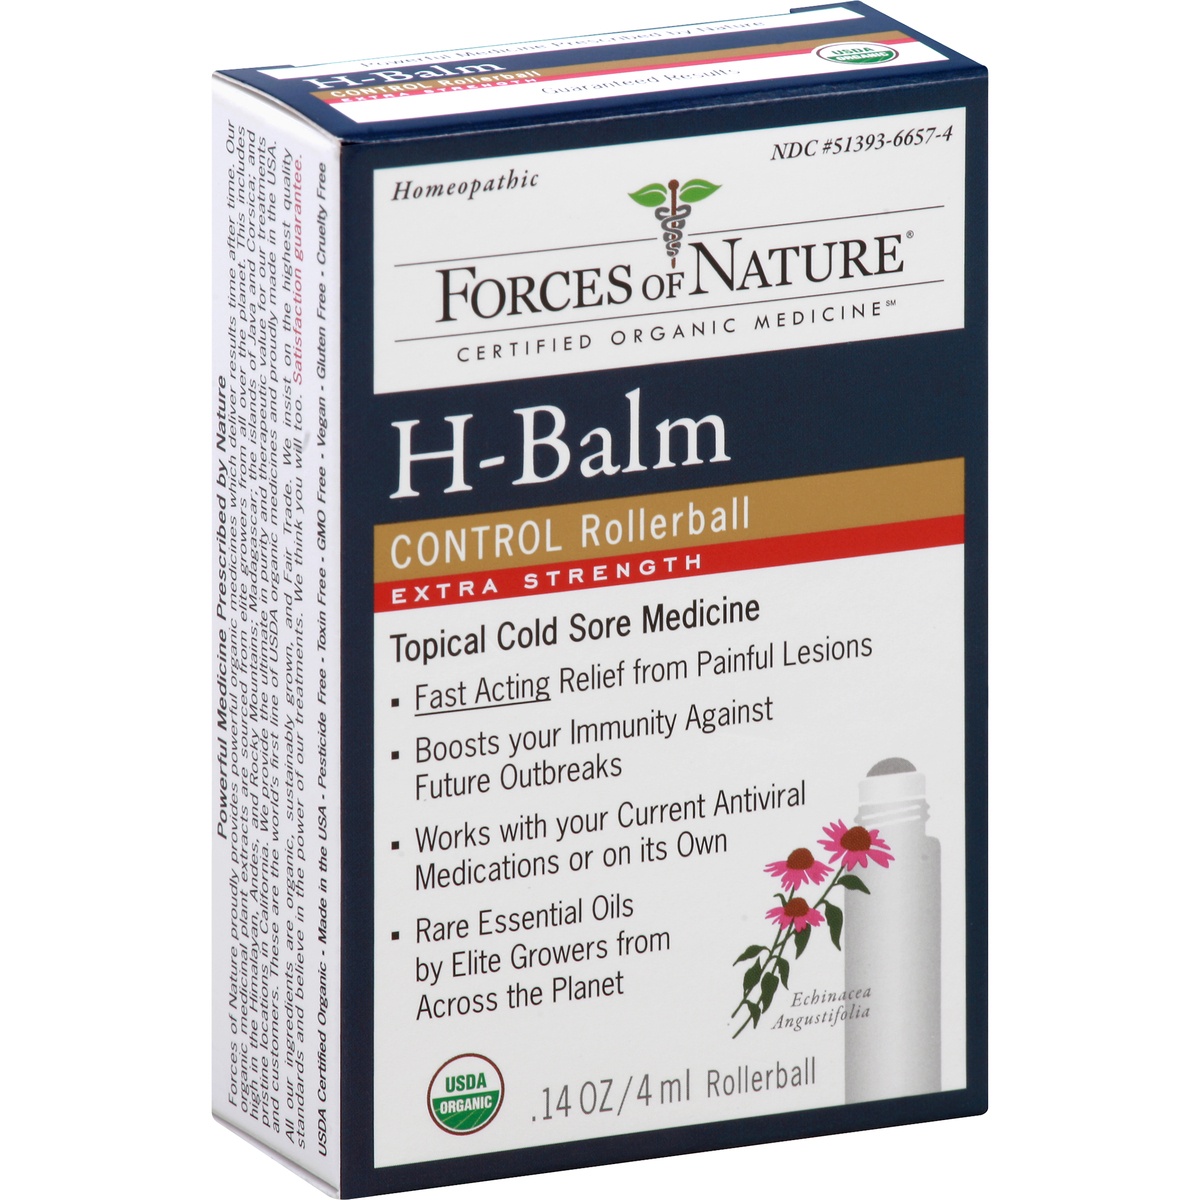 slide 2 of 9, Forces of Nature Rollerball H-balm Control Extra Strength, 4 ml